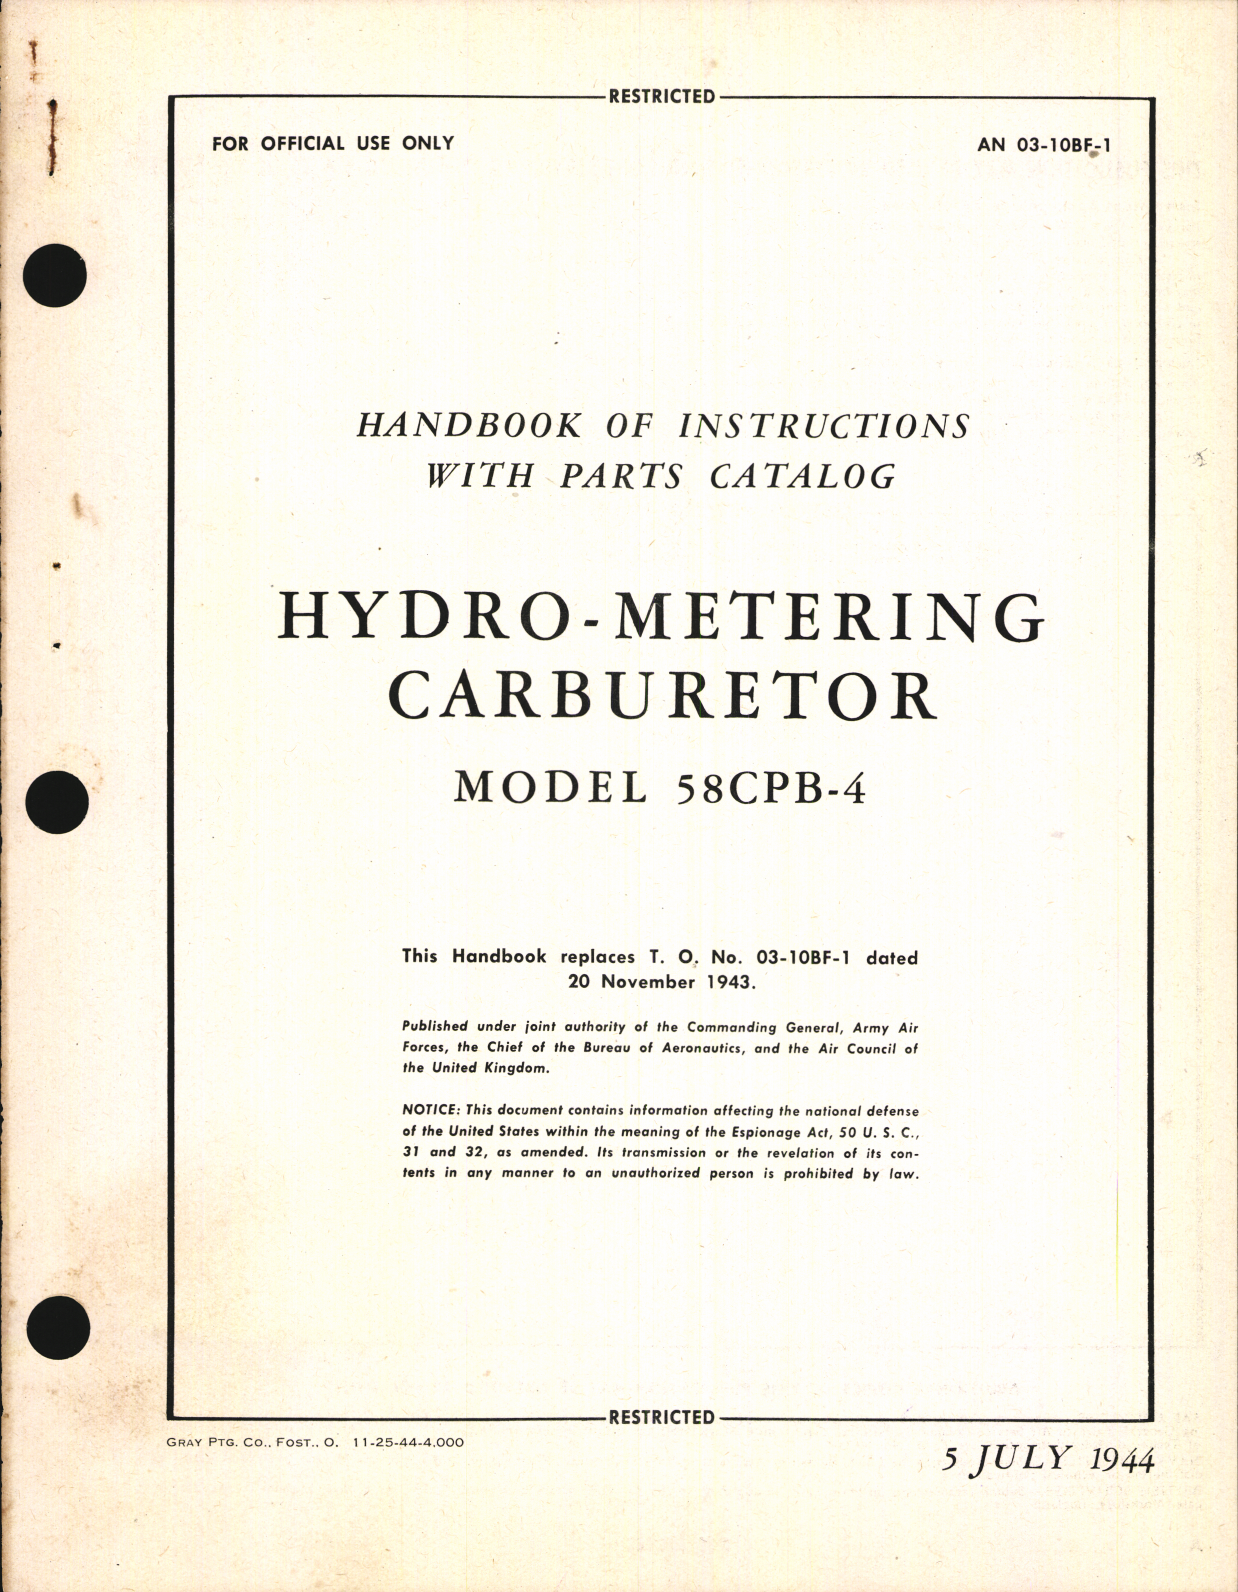 Sample page 1 from AirCorps Library document: Handbook of Instructions with Parts Catalog for Hydro-Metering Carburetor Model 58CPB-4